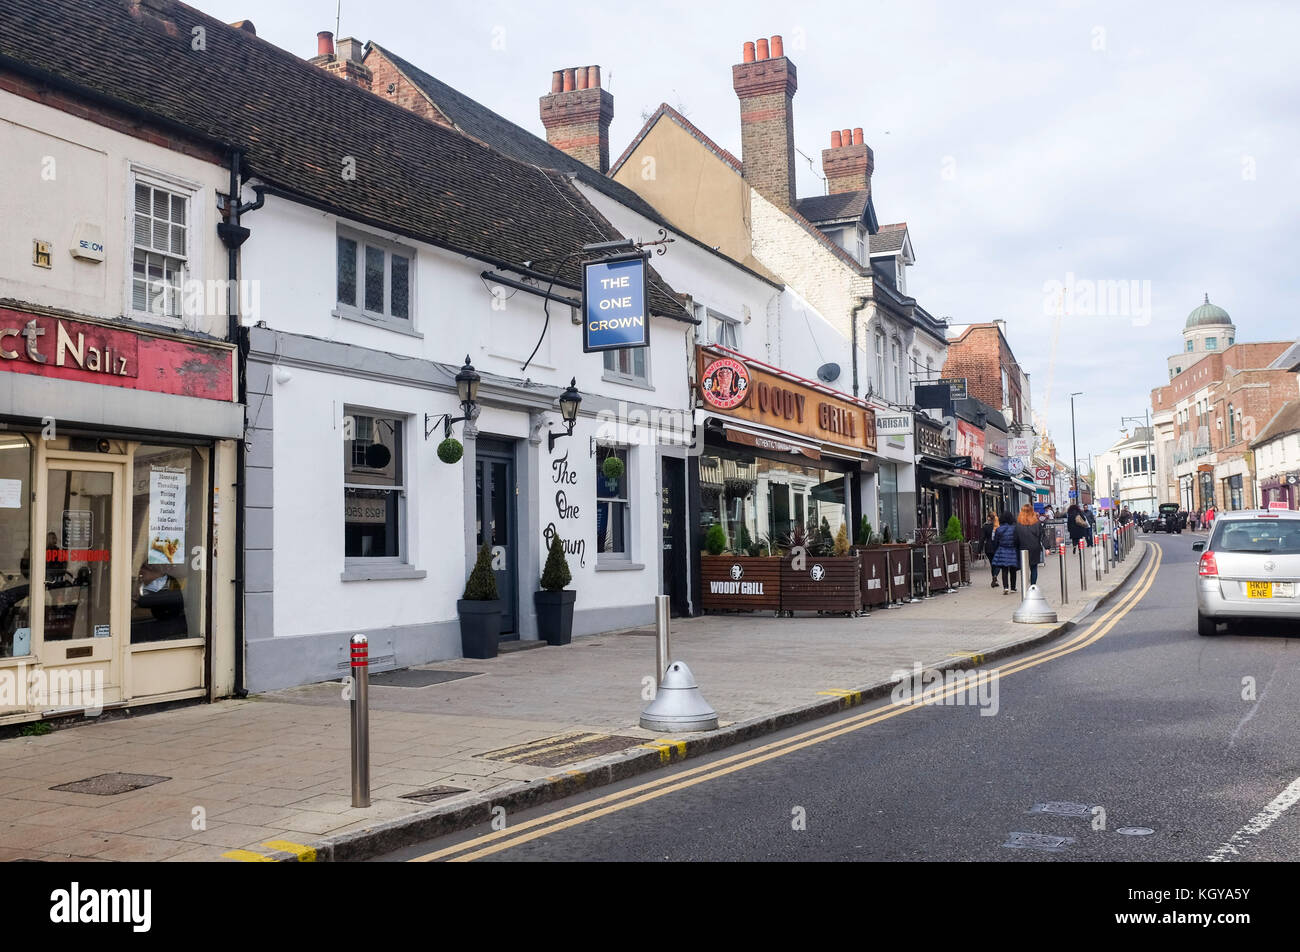 Watford Hertfordshire UK October 2017 - The One Crown pub in the High Street Stock Photo